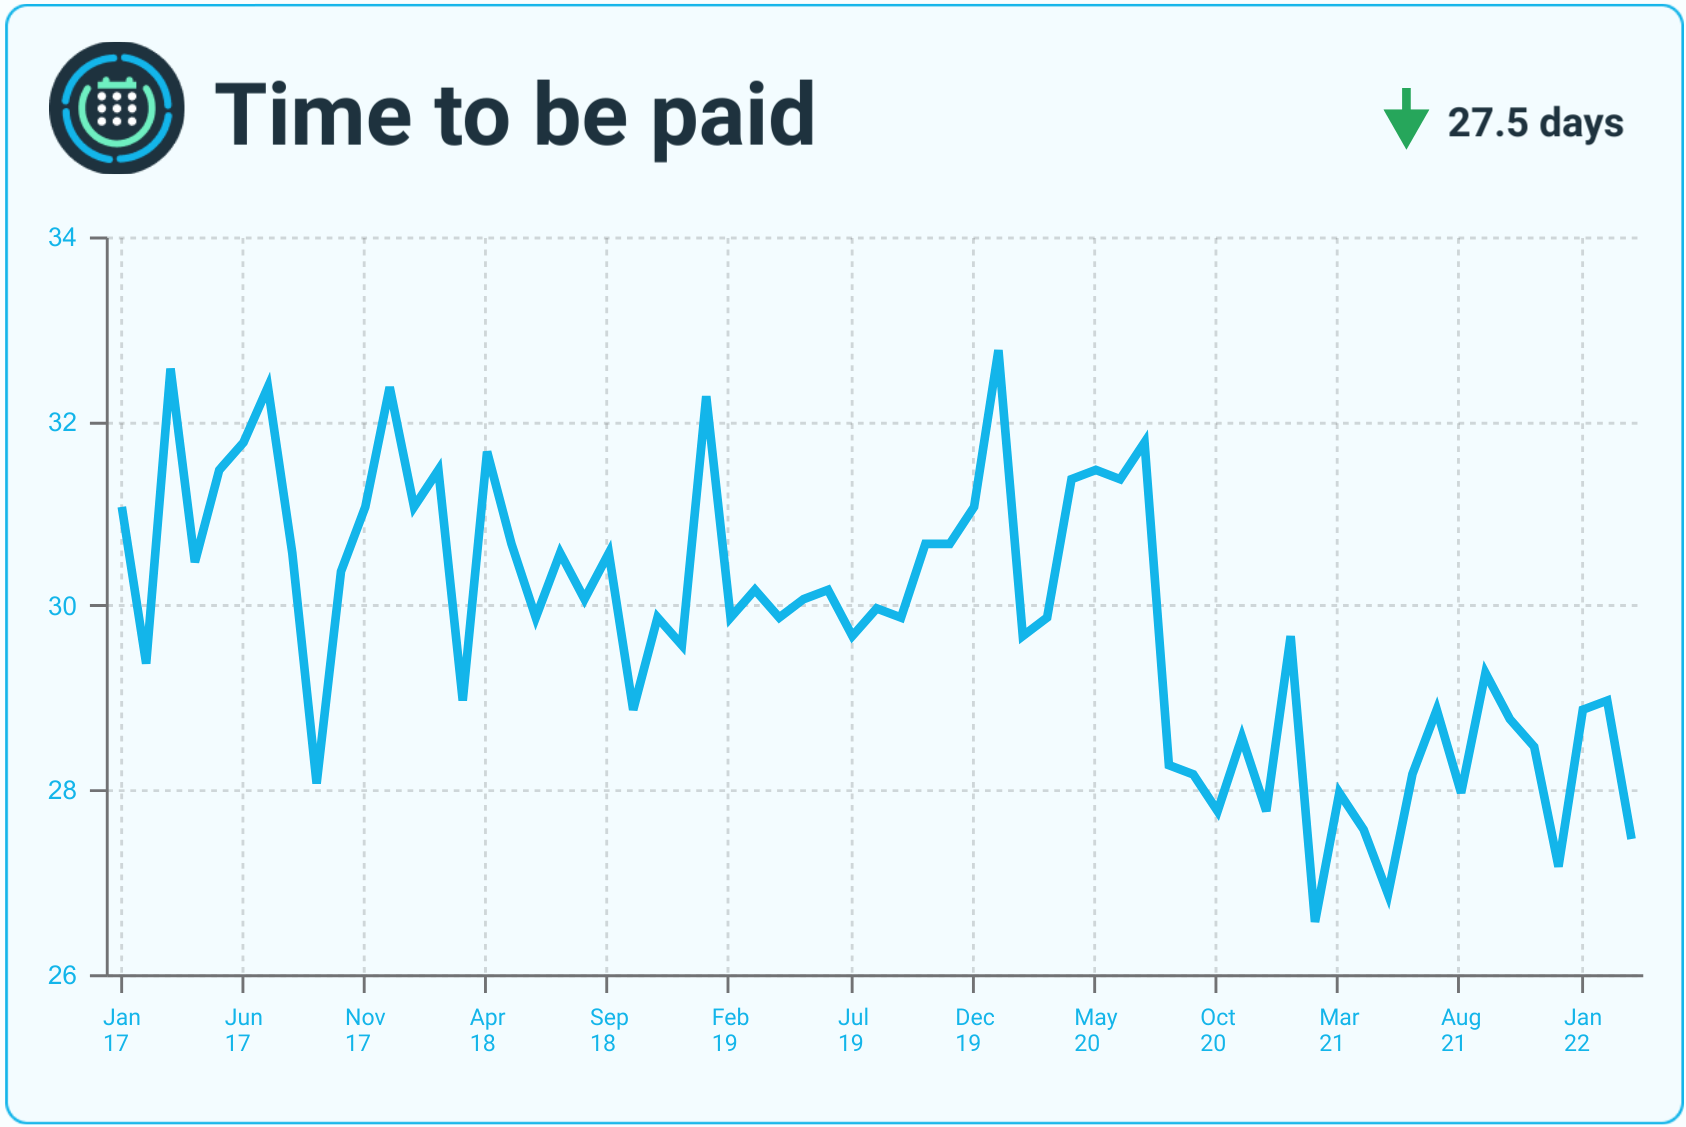 A line graph showing monthly metrics for time to be paid.